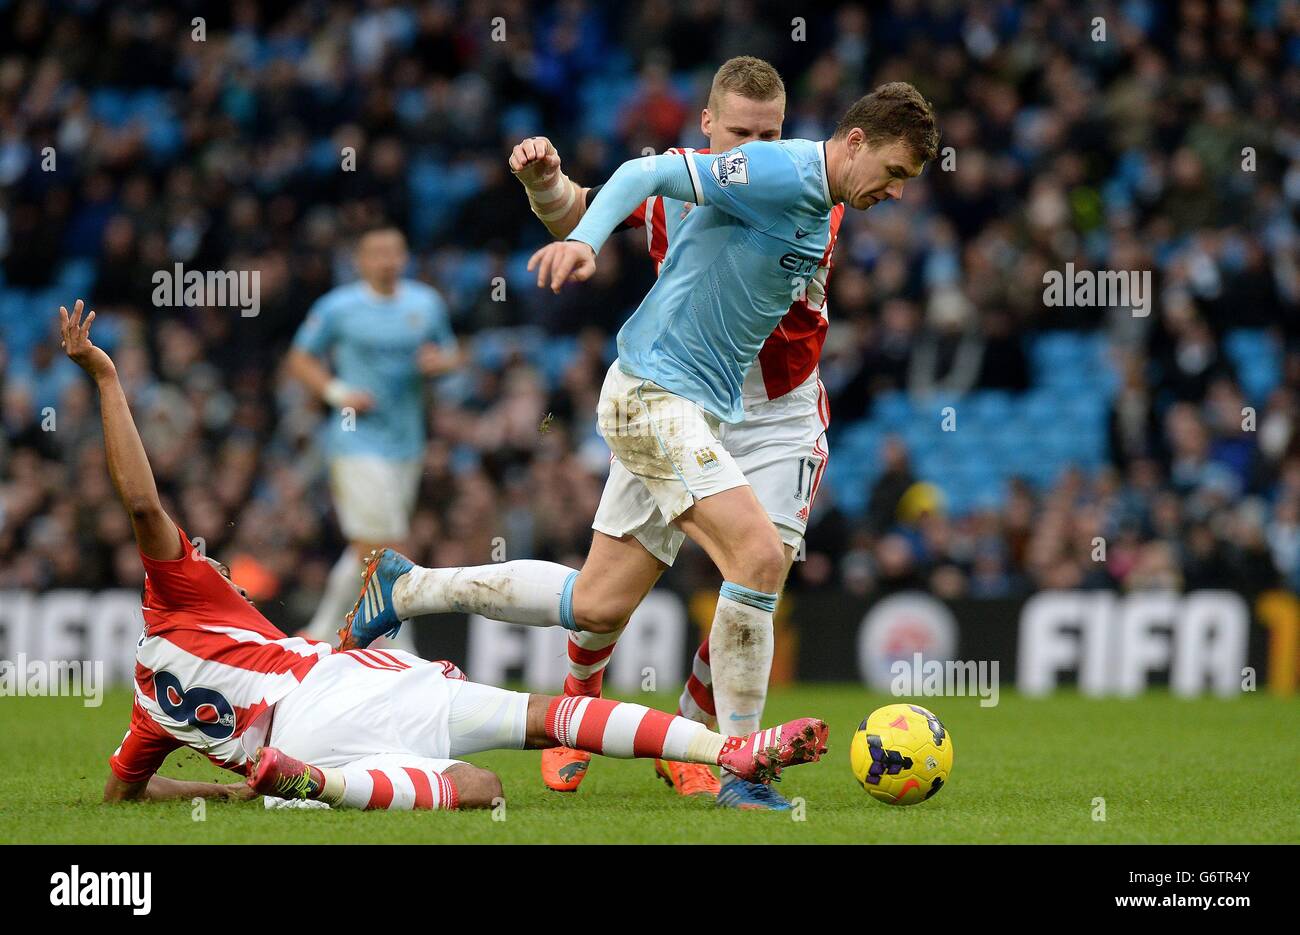 Manchester City's Edin Dzeko battles for the ball with Stoke City's Ryan Shawcross (right) and Wilson Palacios (left), during the Barclays Premier League match at the Etihad Stadium, Manchester. Stock Photo